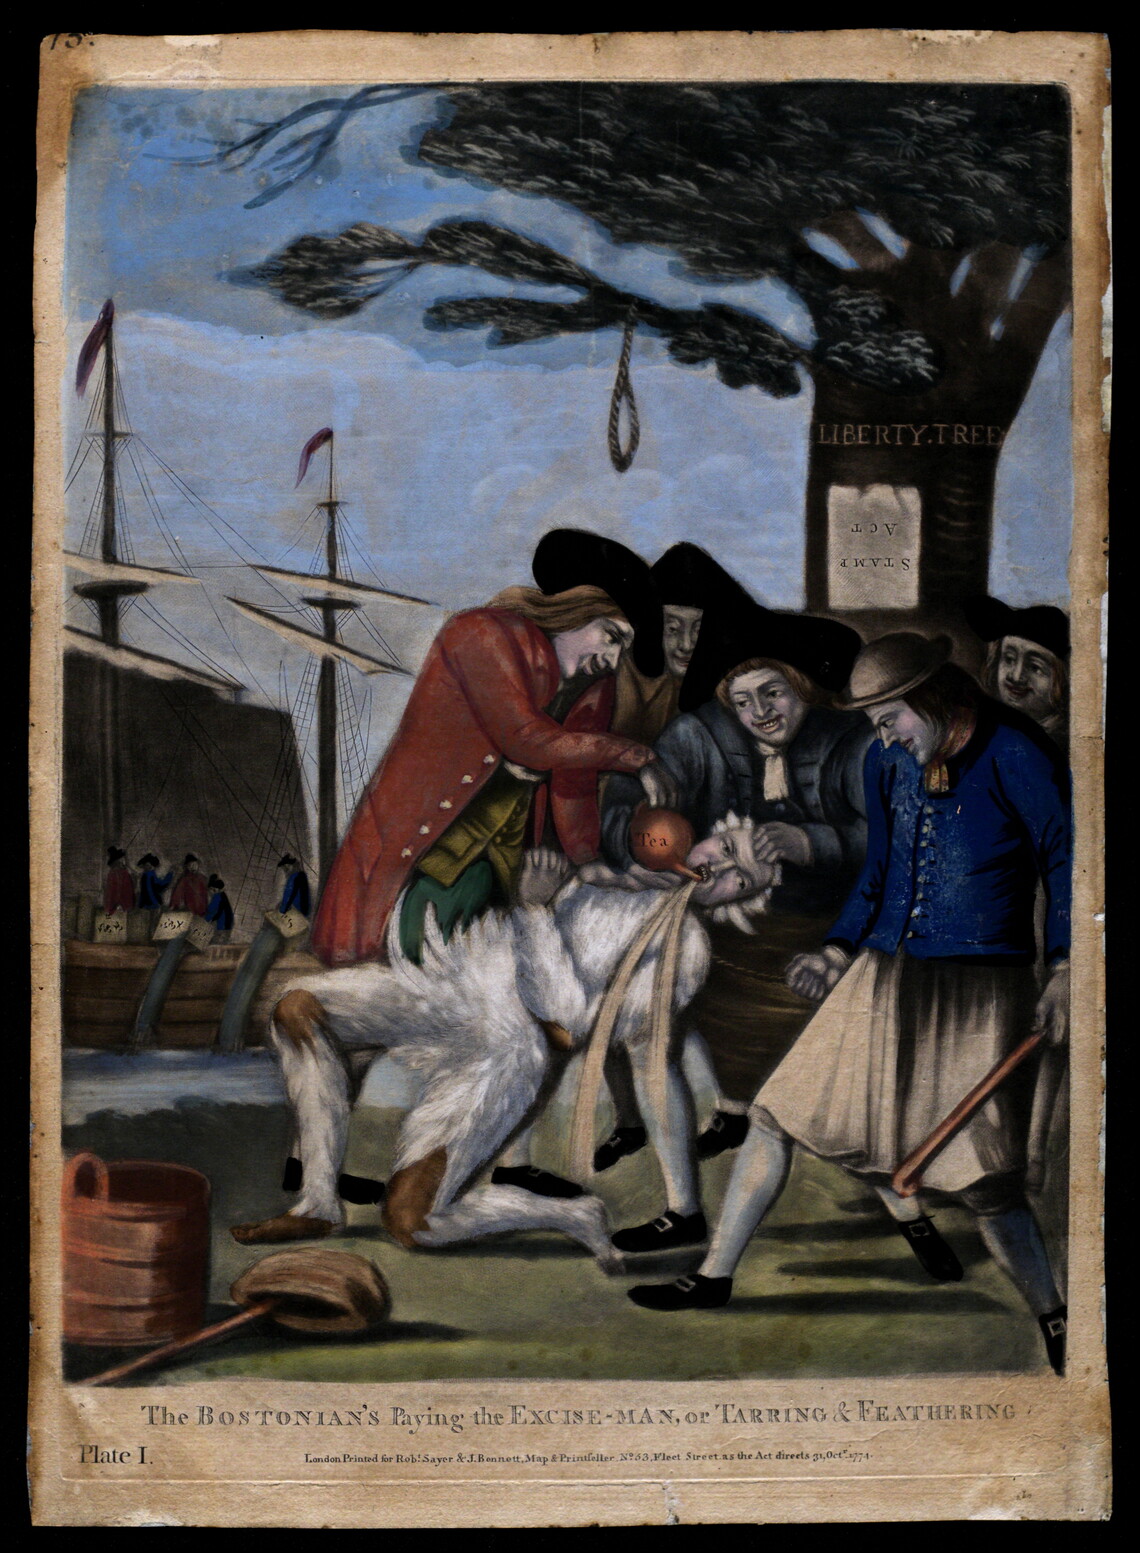 Dawe, Philip (ca. 1750-1785) The Bostonian's Paying the Excise-man, or Tarring & Feathering